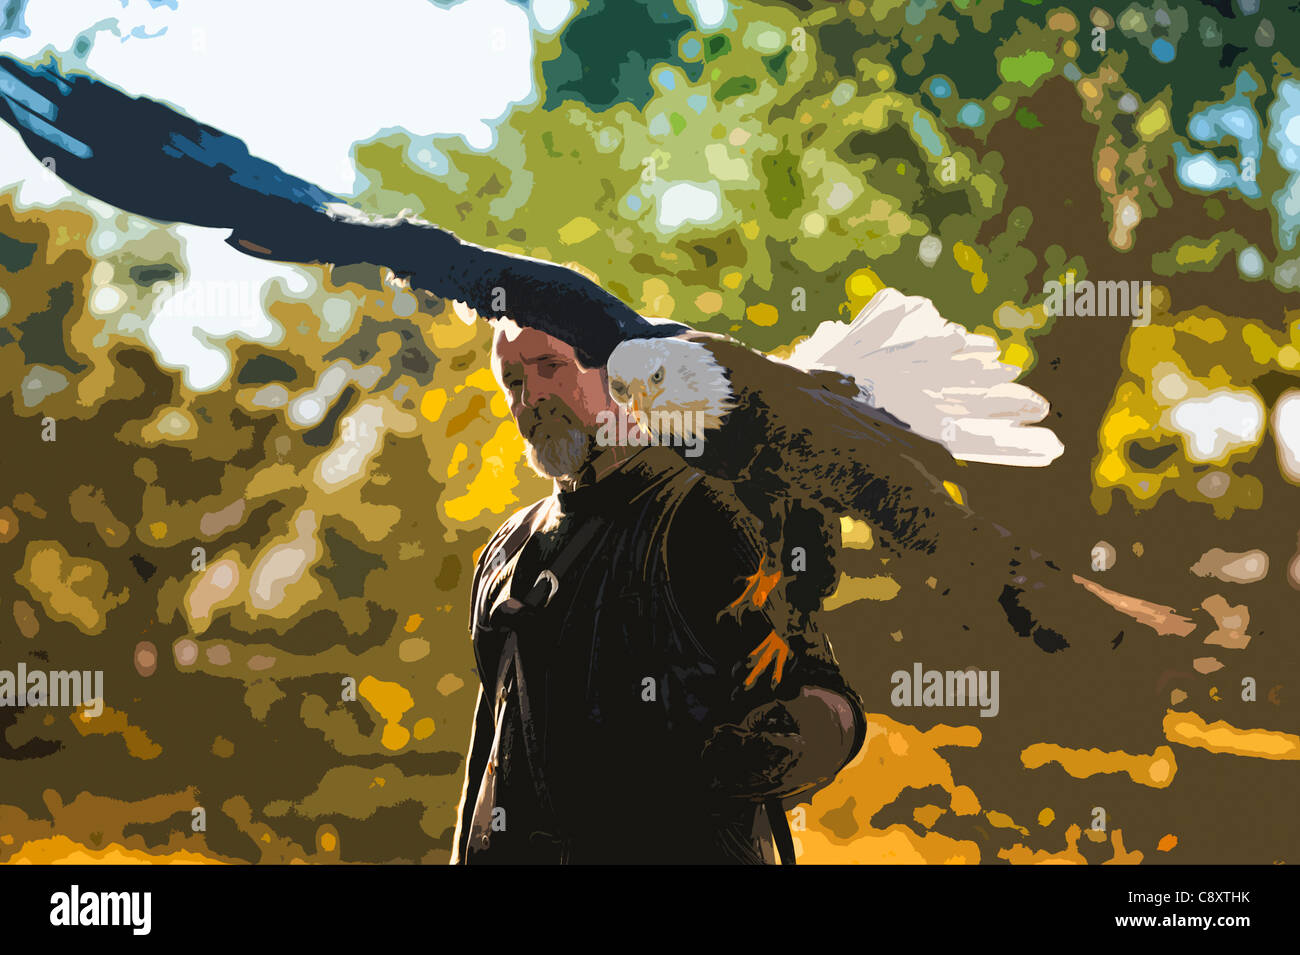 Men carrying a bald eagle on his arm. Stock Photo